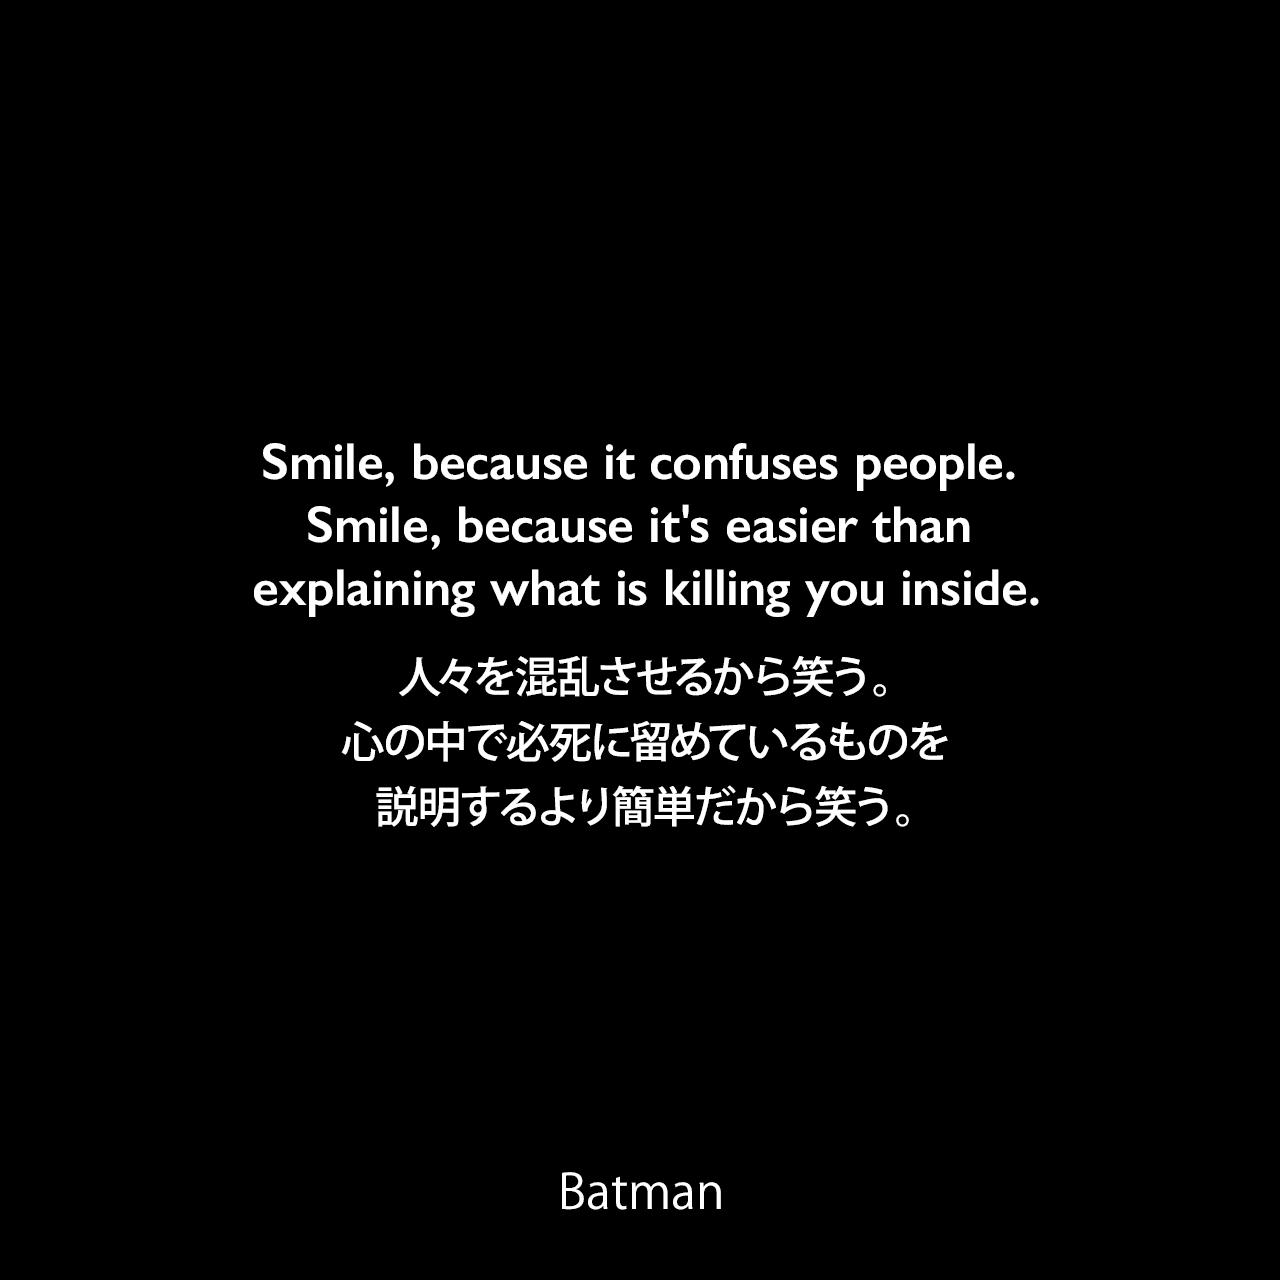 Smile, because it confuses people. Smile, because it's easier than explaining what is killing you inside.人々を混乱させるから笑う。心の中で必死に留めているものを説明するより簡単だから笑う。- Jorker 